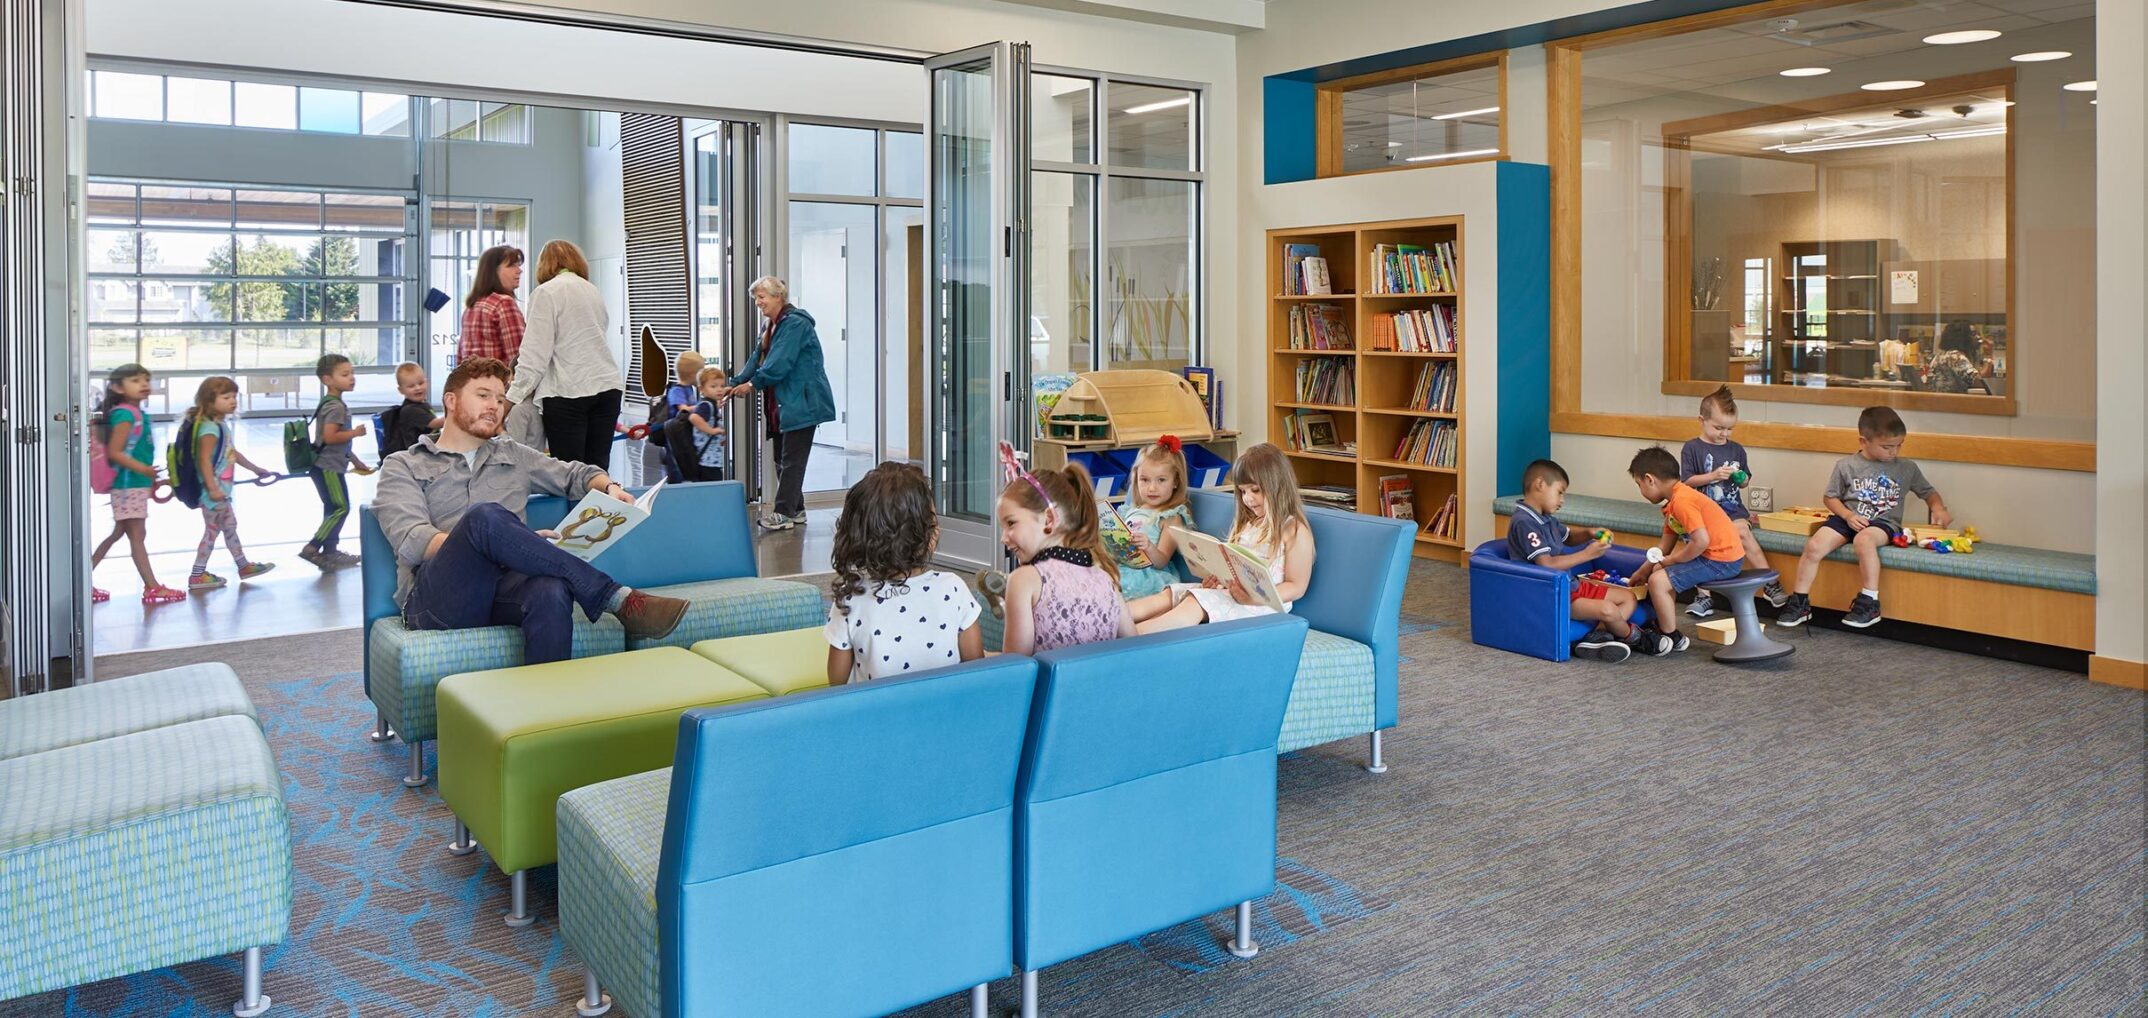 The community room at Lake Stevens Early Learning Center in Washington state provides family space with toys and books, along with comfortable seating and an area for meetings. - NAC